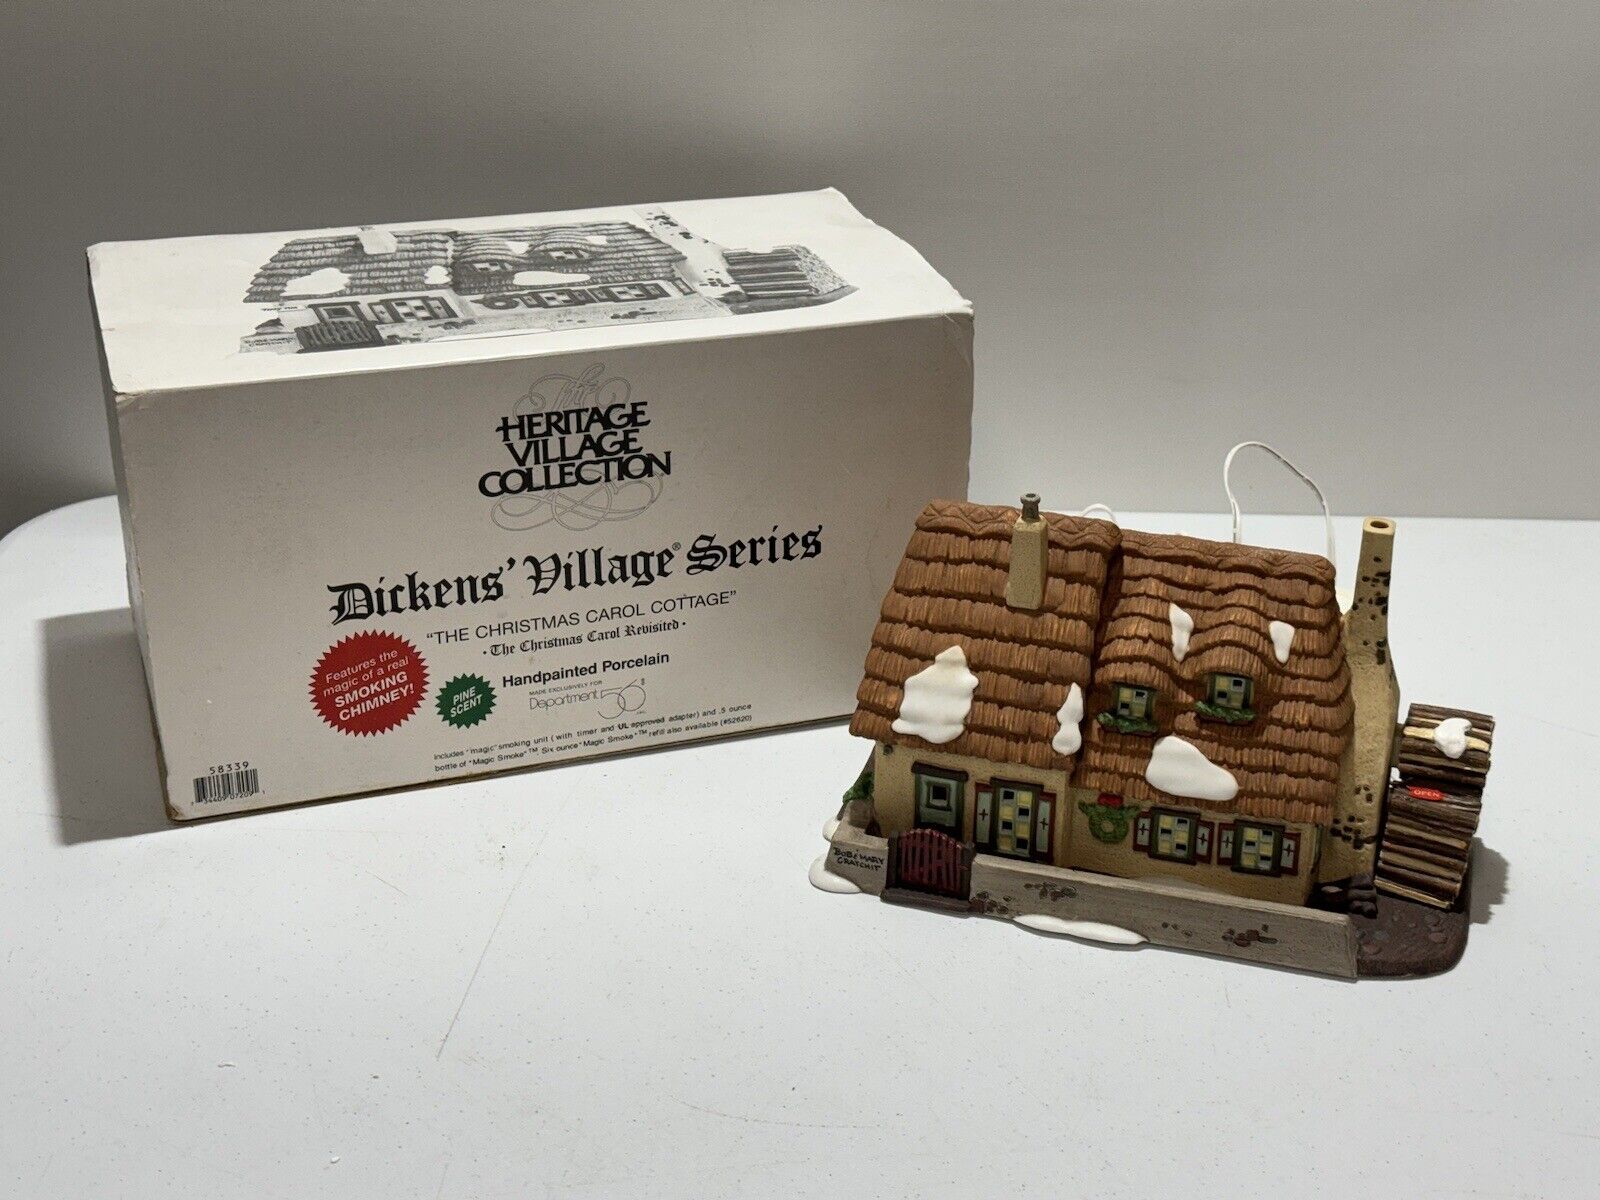 Retired Dept. 56 Christmas Carol Cottage Heritage Village Collection Dickens